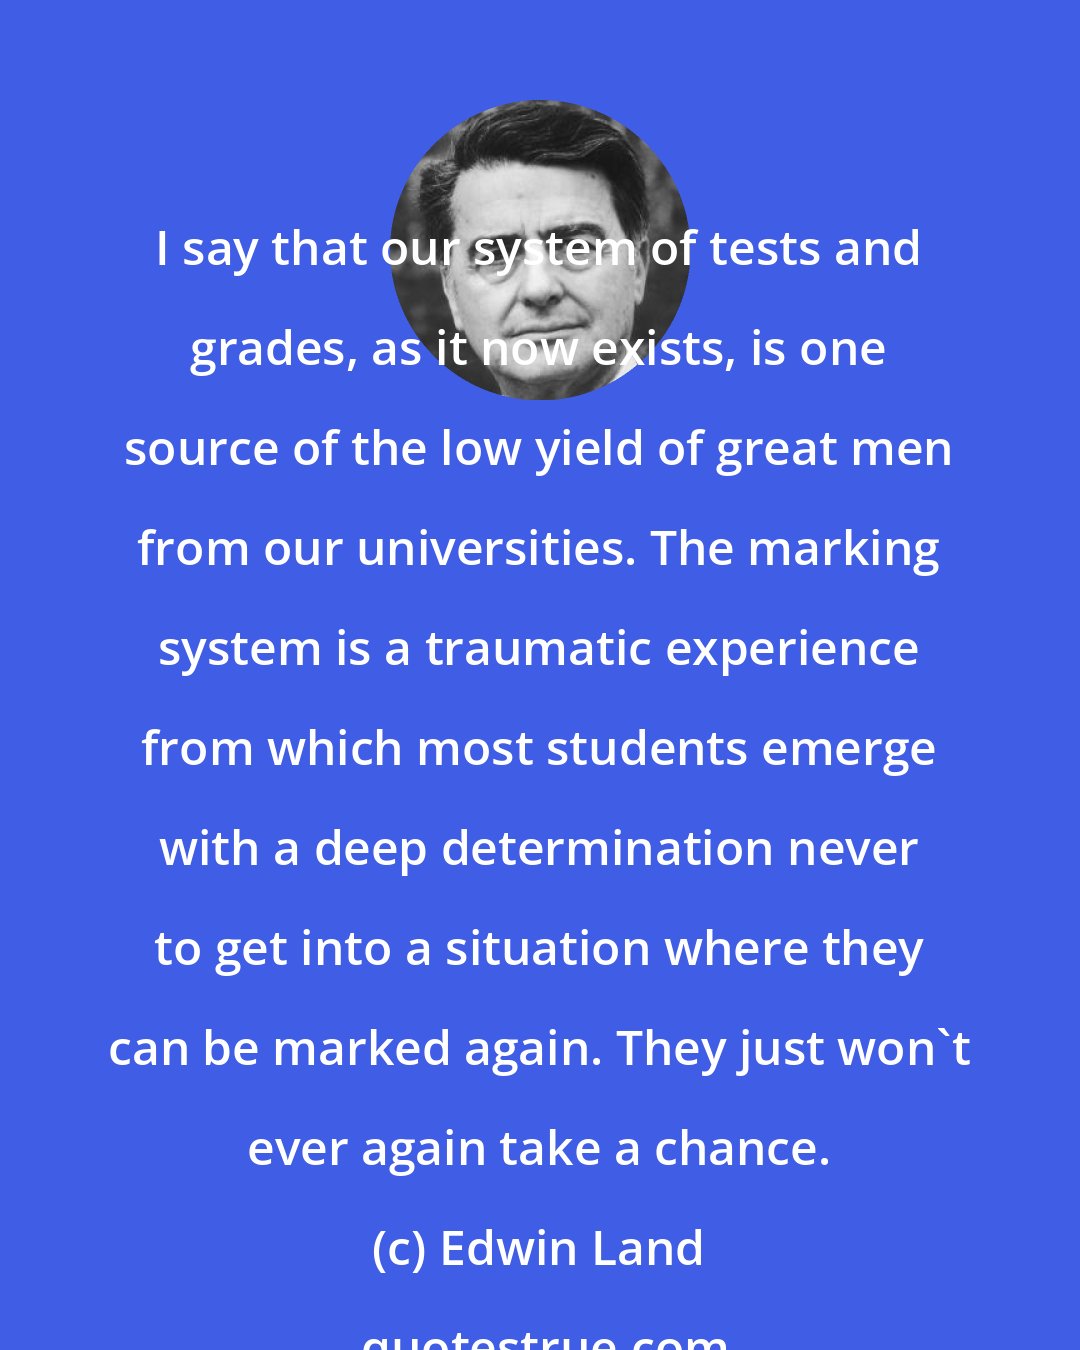 Edwin Land: I say that our system of tests and grades, as it now exists, is one source of the low yield of great men from our universities. The marking system is a traumatic experience from which most students emerge with a deep determination never to get into a situation where they can be marked again. They just won't ever again take a chance.